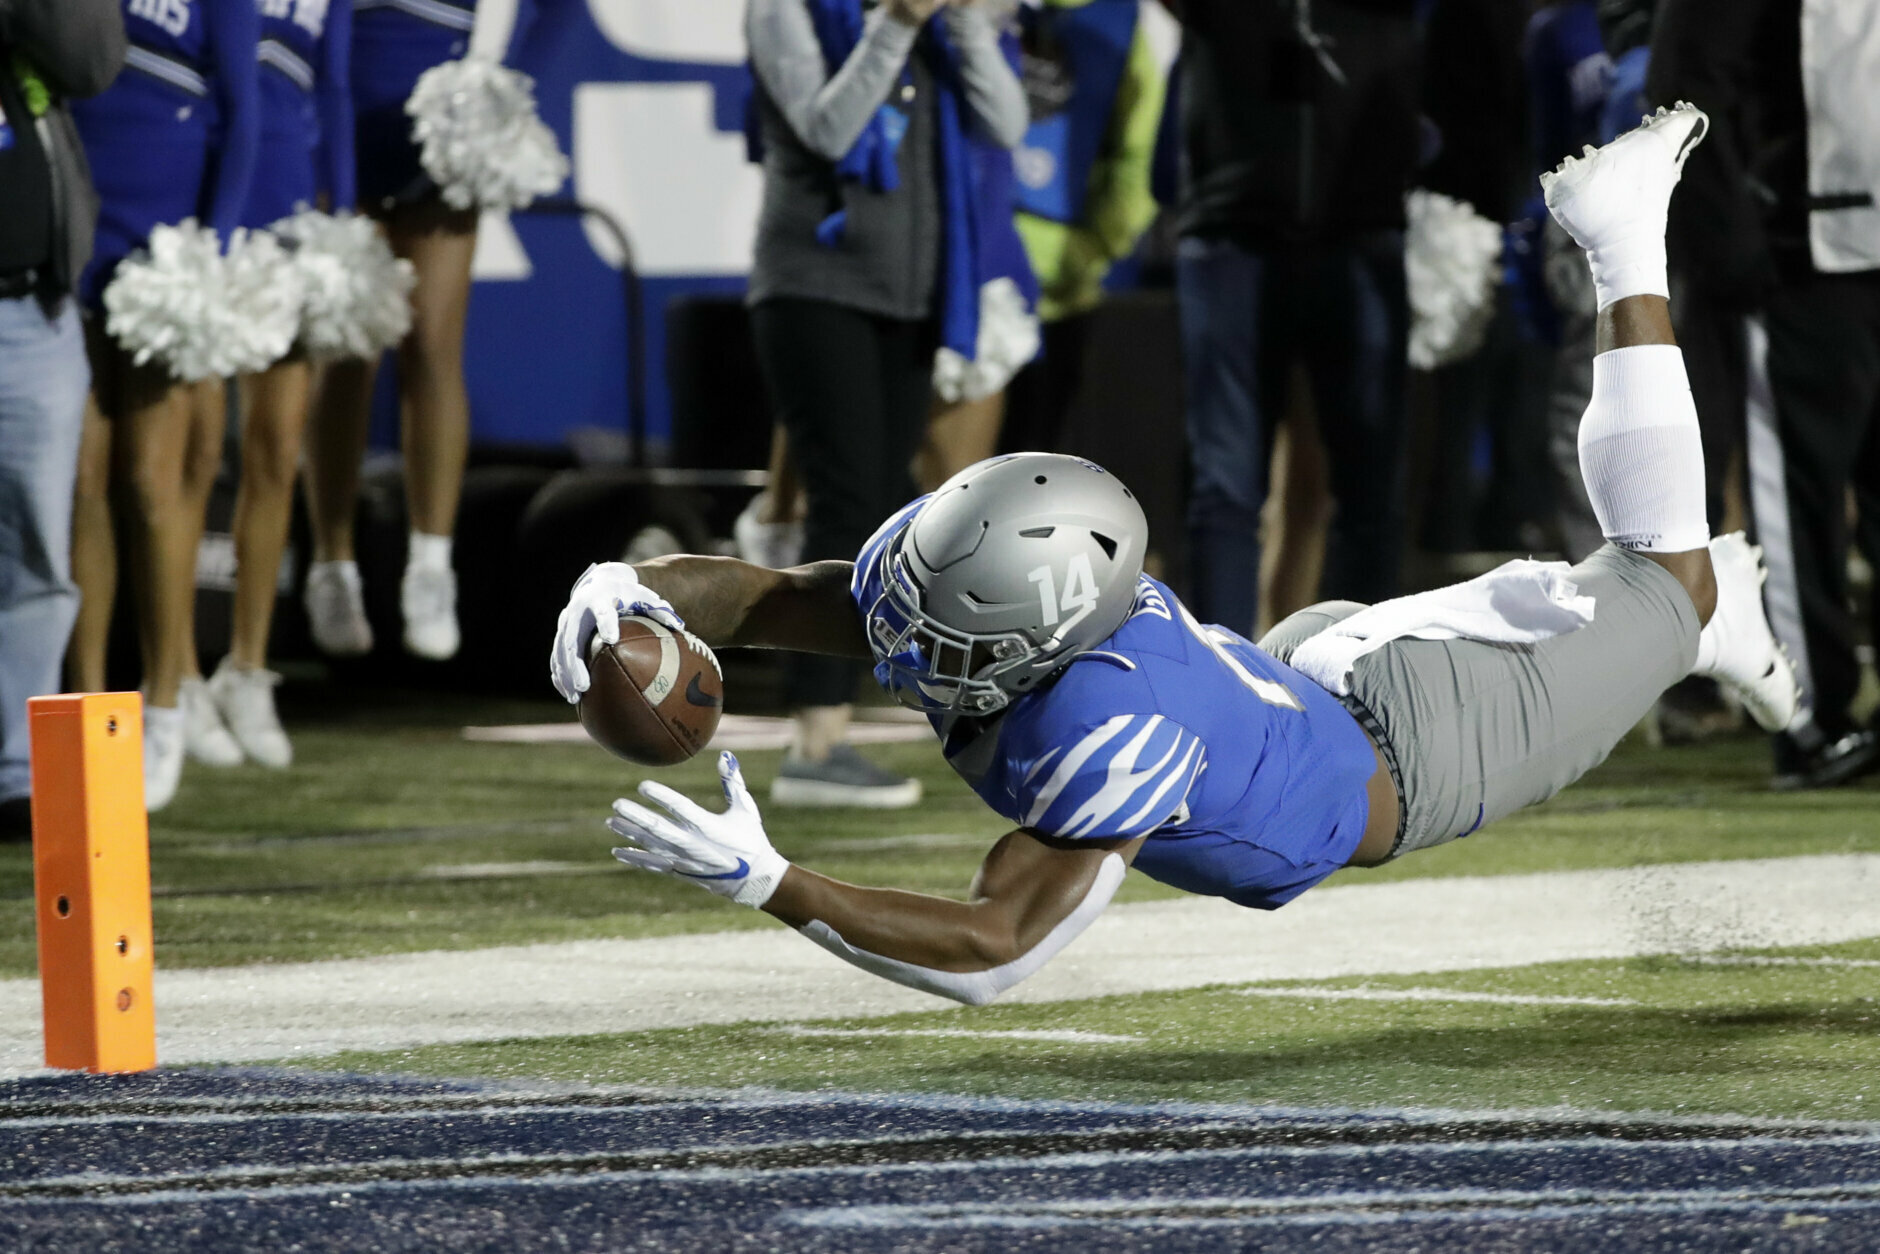 Memphis wide receiver Antonio Gibson dives for the end zone against SMU in the first half of an NCAA college football game Saturday, Nov. 2, 2019, in Memphis, Tenn. Gibson was ruled down just short of the goal line. (AP Photo/Mark Humphrey)